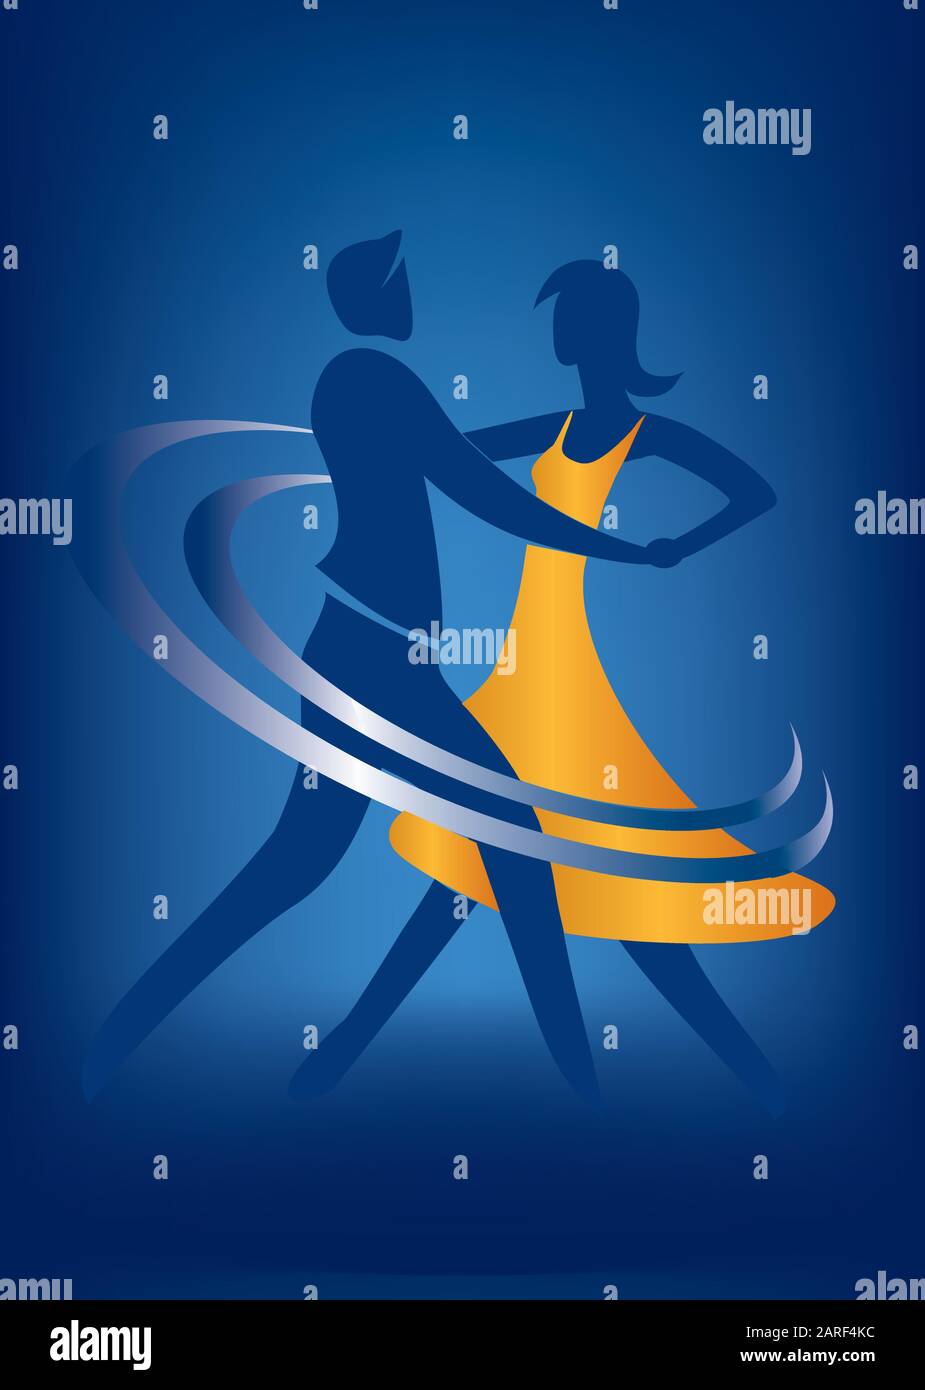 Balroom Dancers Couple. Illustration of Young couple dancing ballroom dance on blue background.Vector available Stock Vector